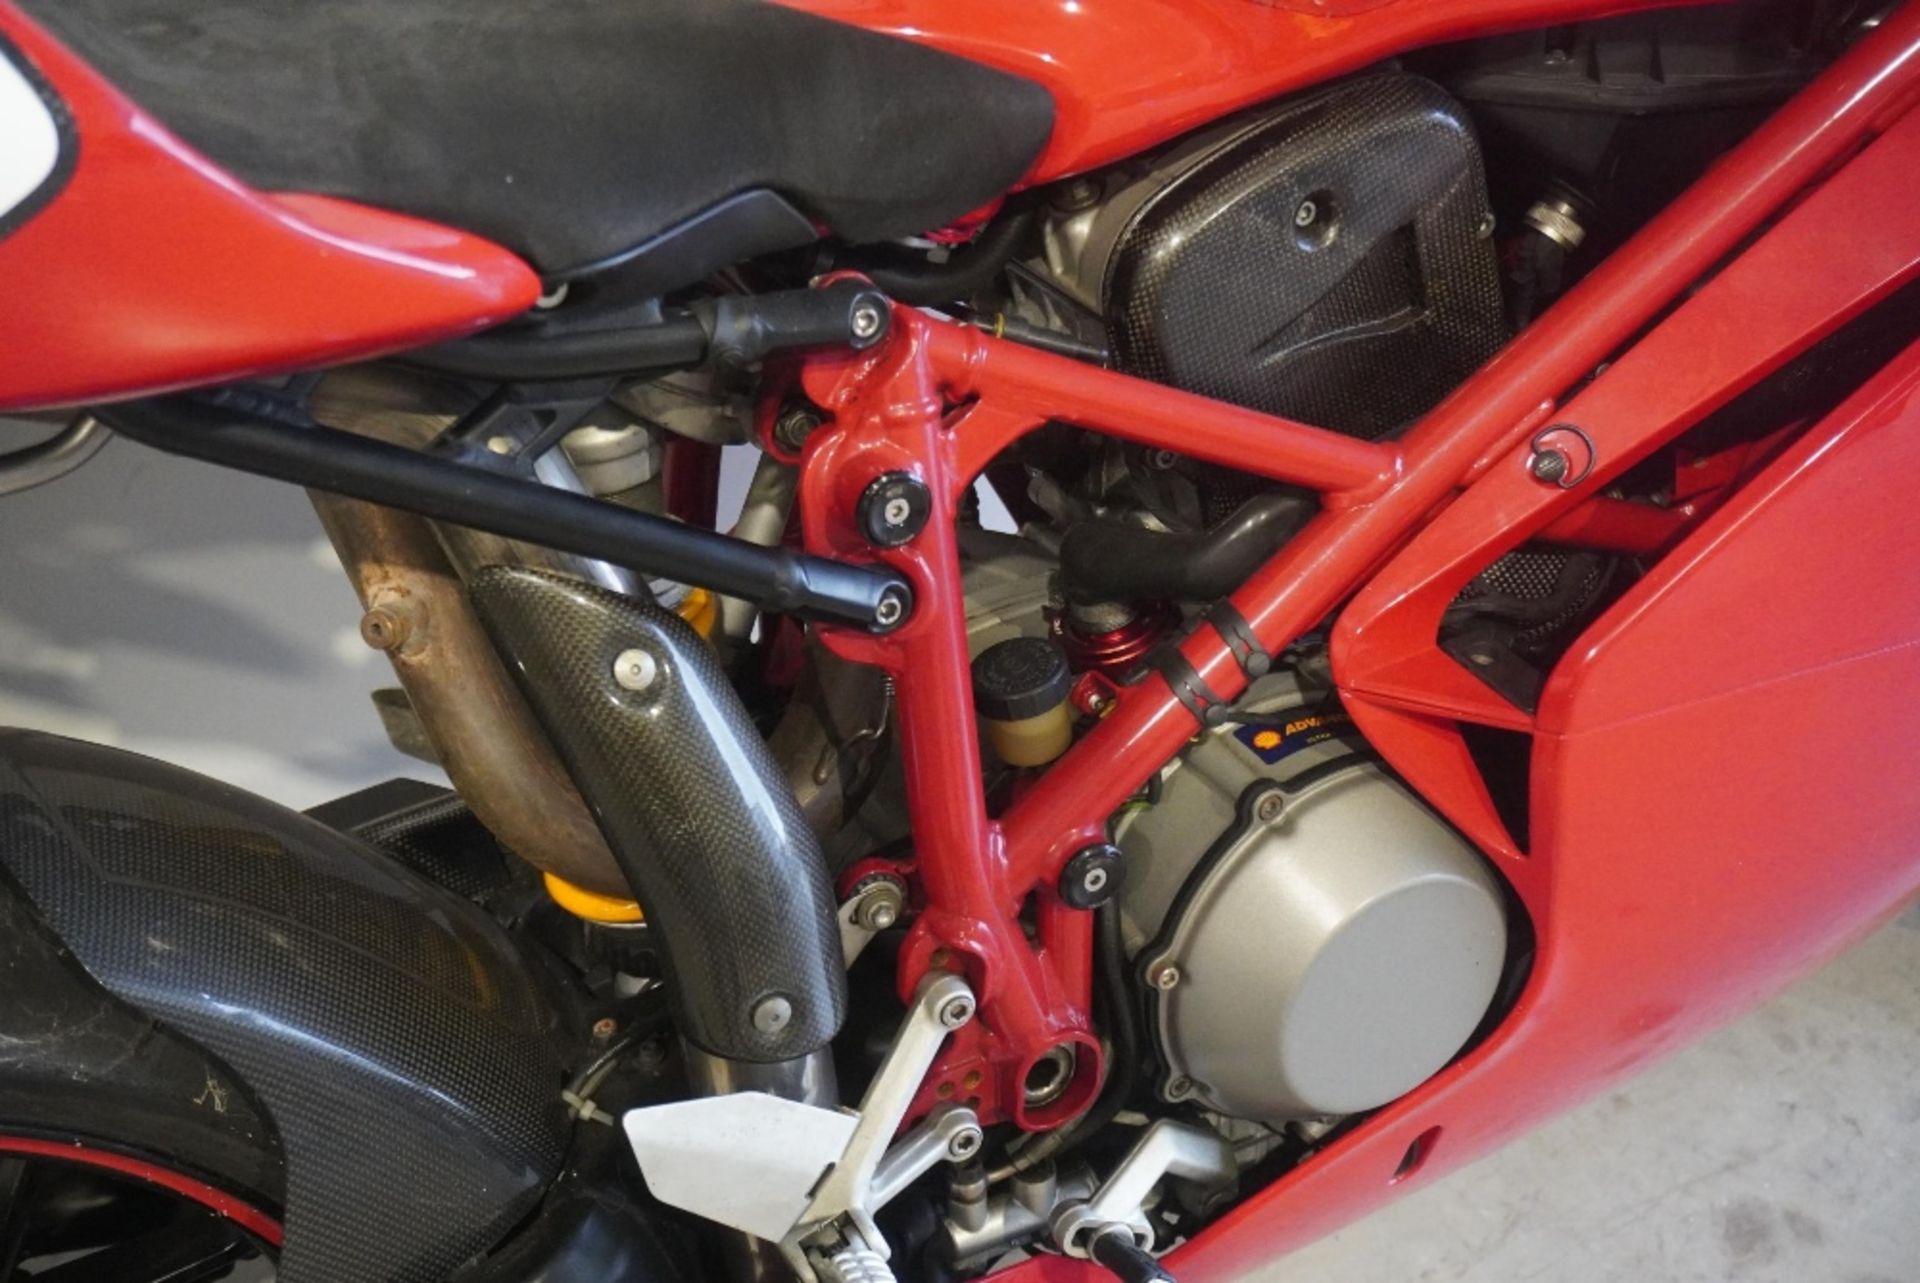 Ducati 999s motorcycle. 2005. 998cc. Runs but needs new battery. Comes with folder of history and - Image 4 of 6